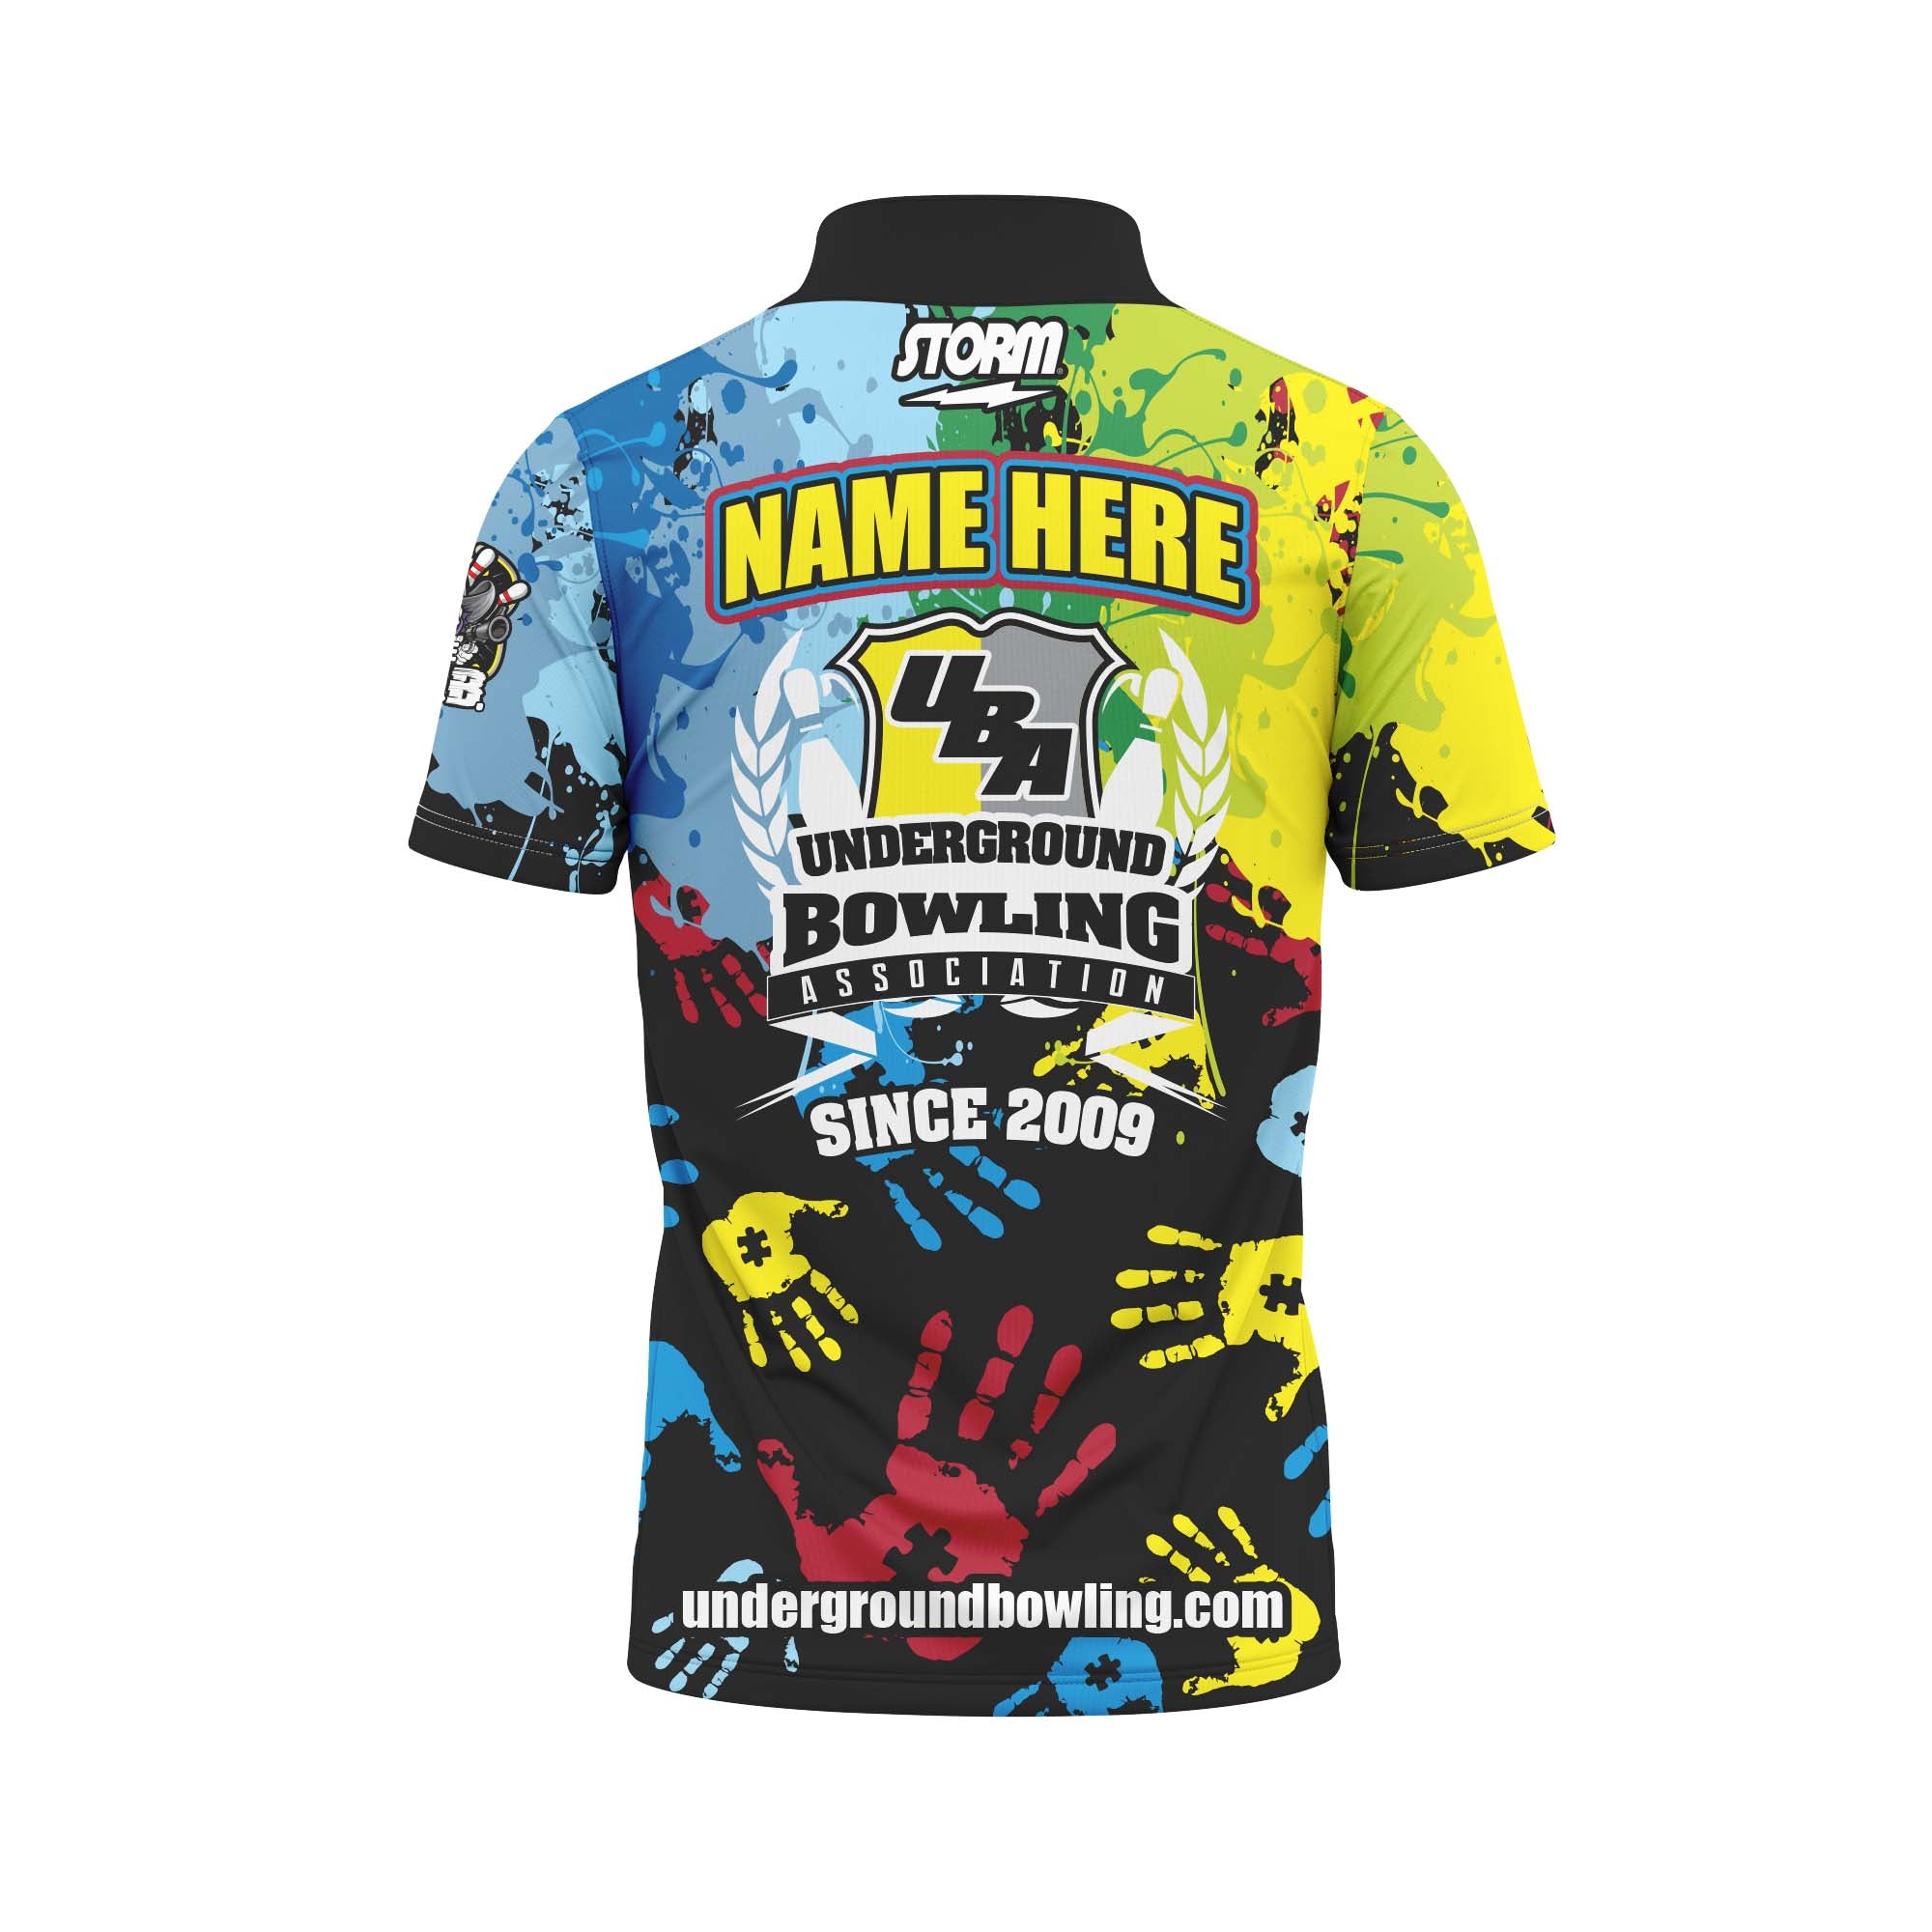 The MOB Autism Jersey